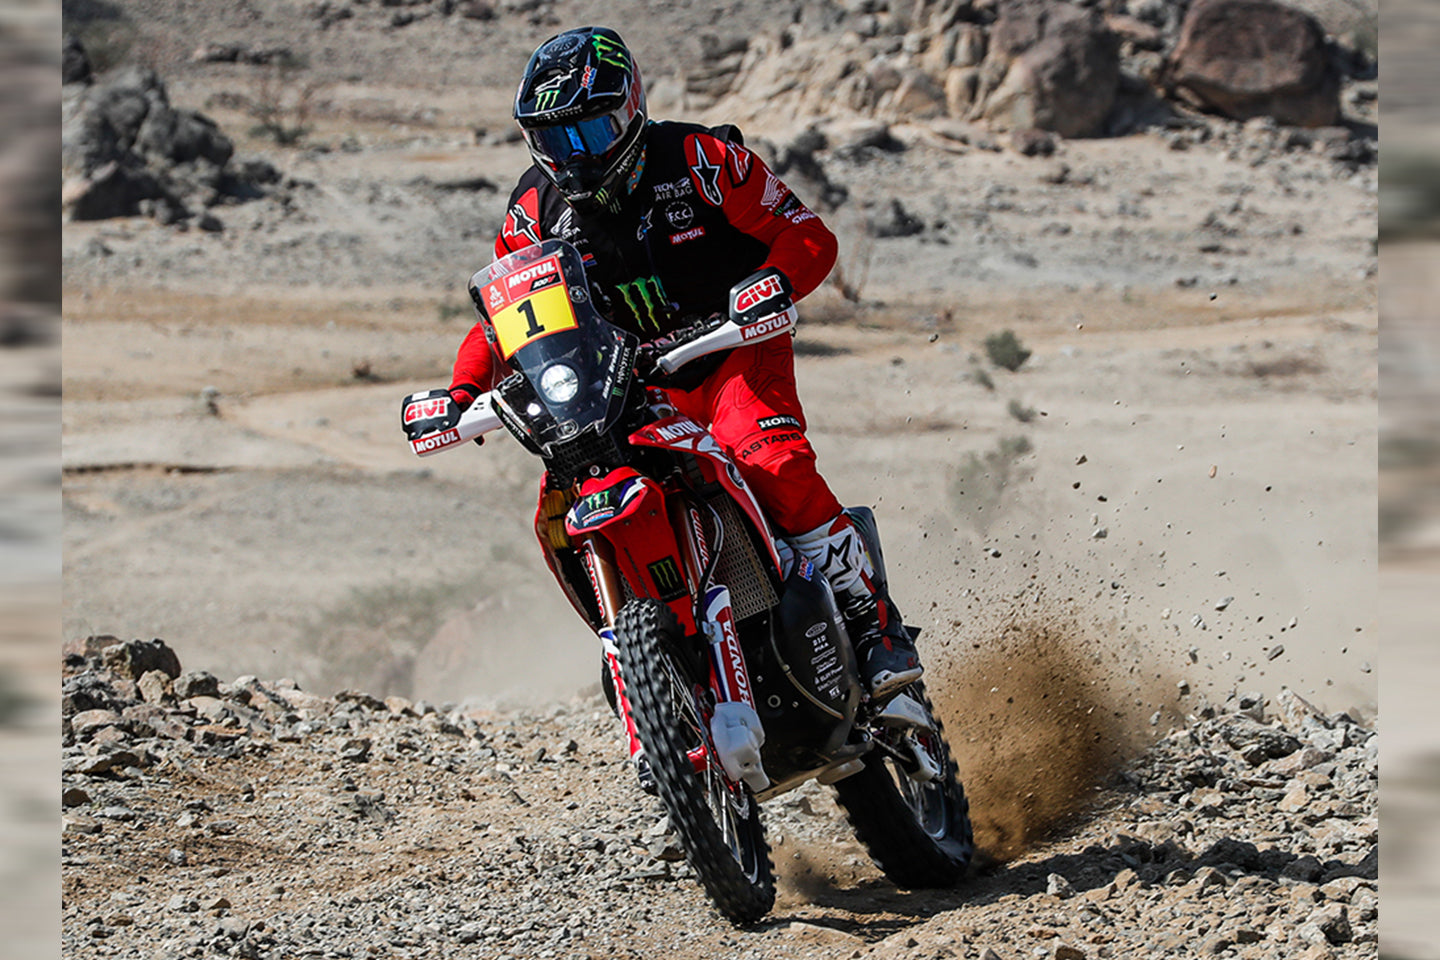 RICKY BRABEC VICTORIOUS IN 2021 DAKAR RALLY PROLOGUE